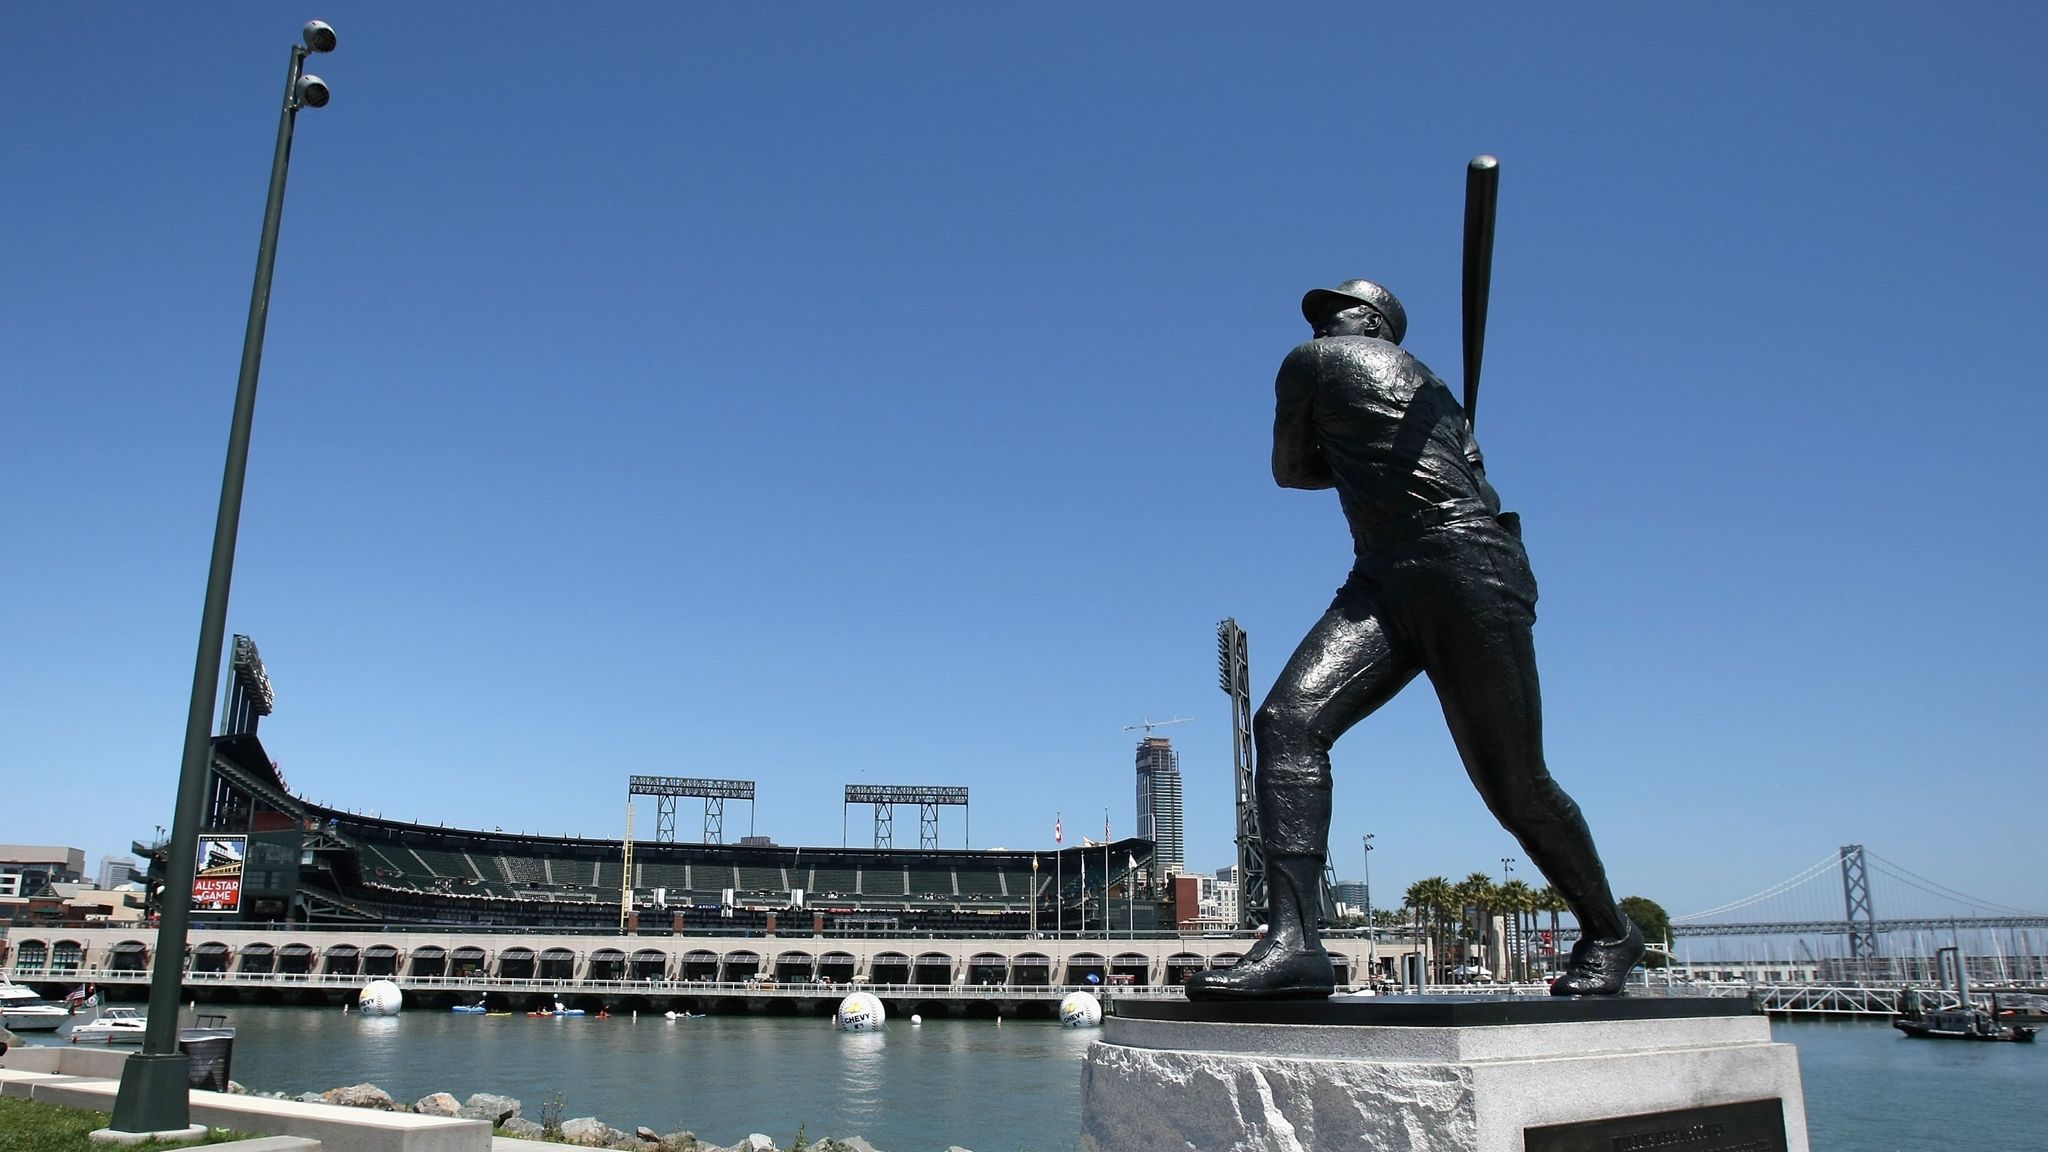 Willie McCovey, MLB Hall of Famer and San Francisco Giants great